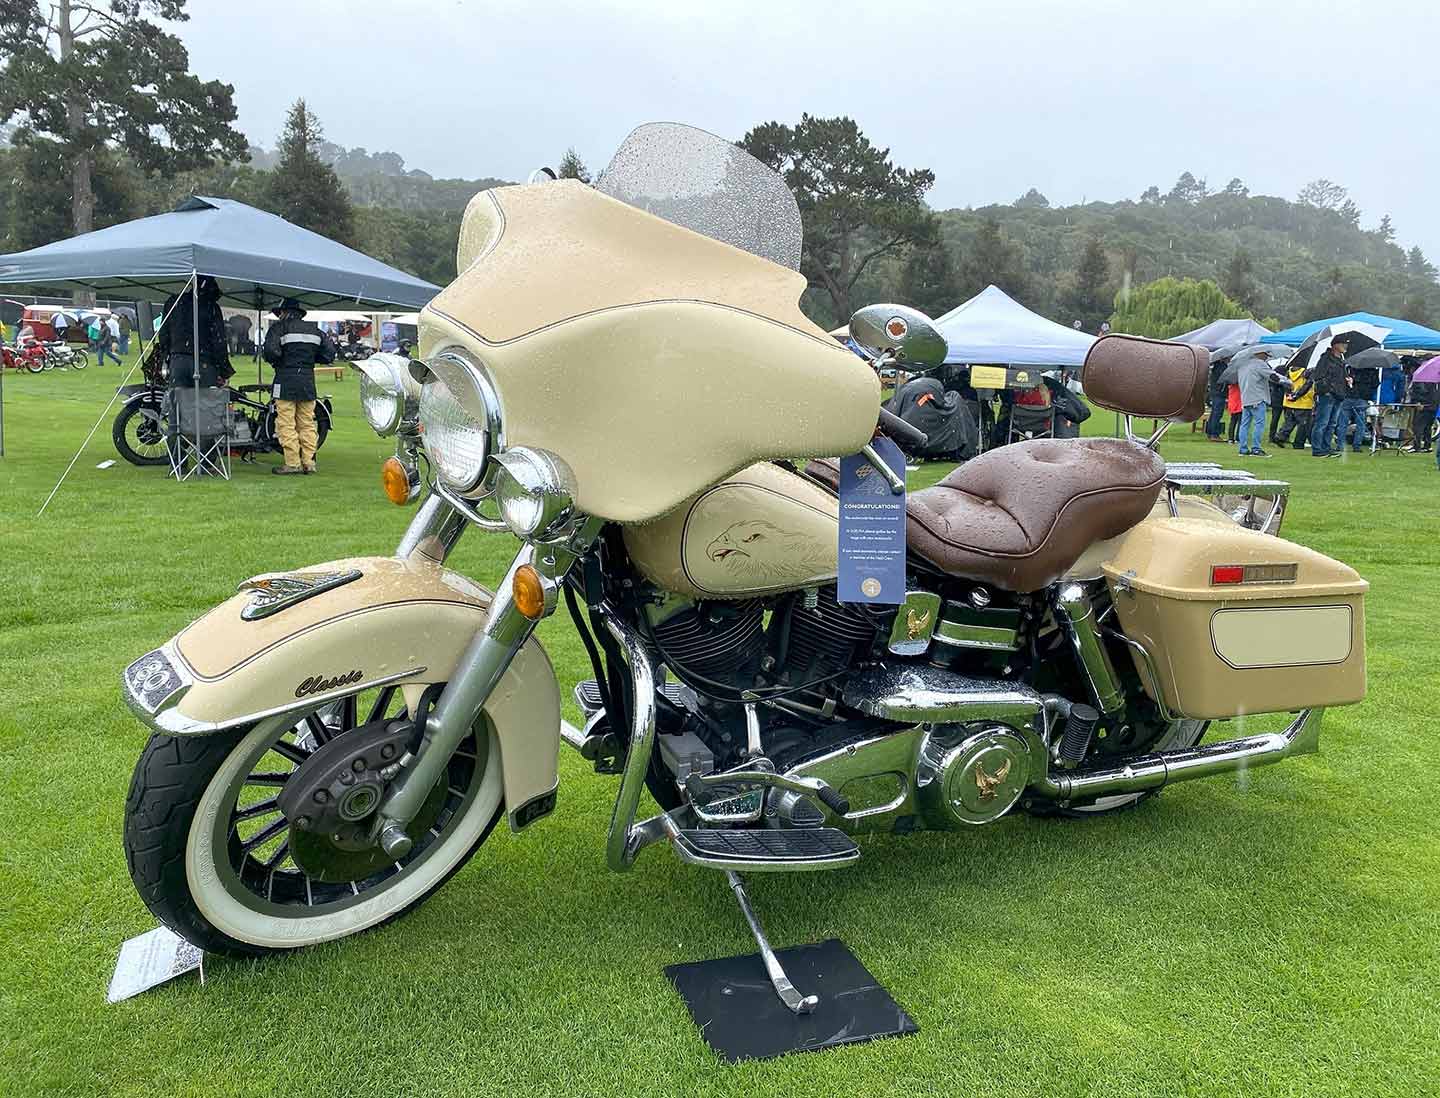 First Place, American was given to John Ventura’s 1979 Harley-Davidson Electra Glide.